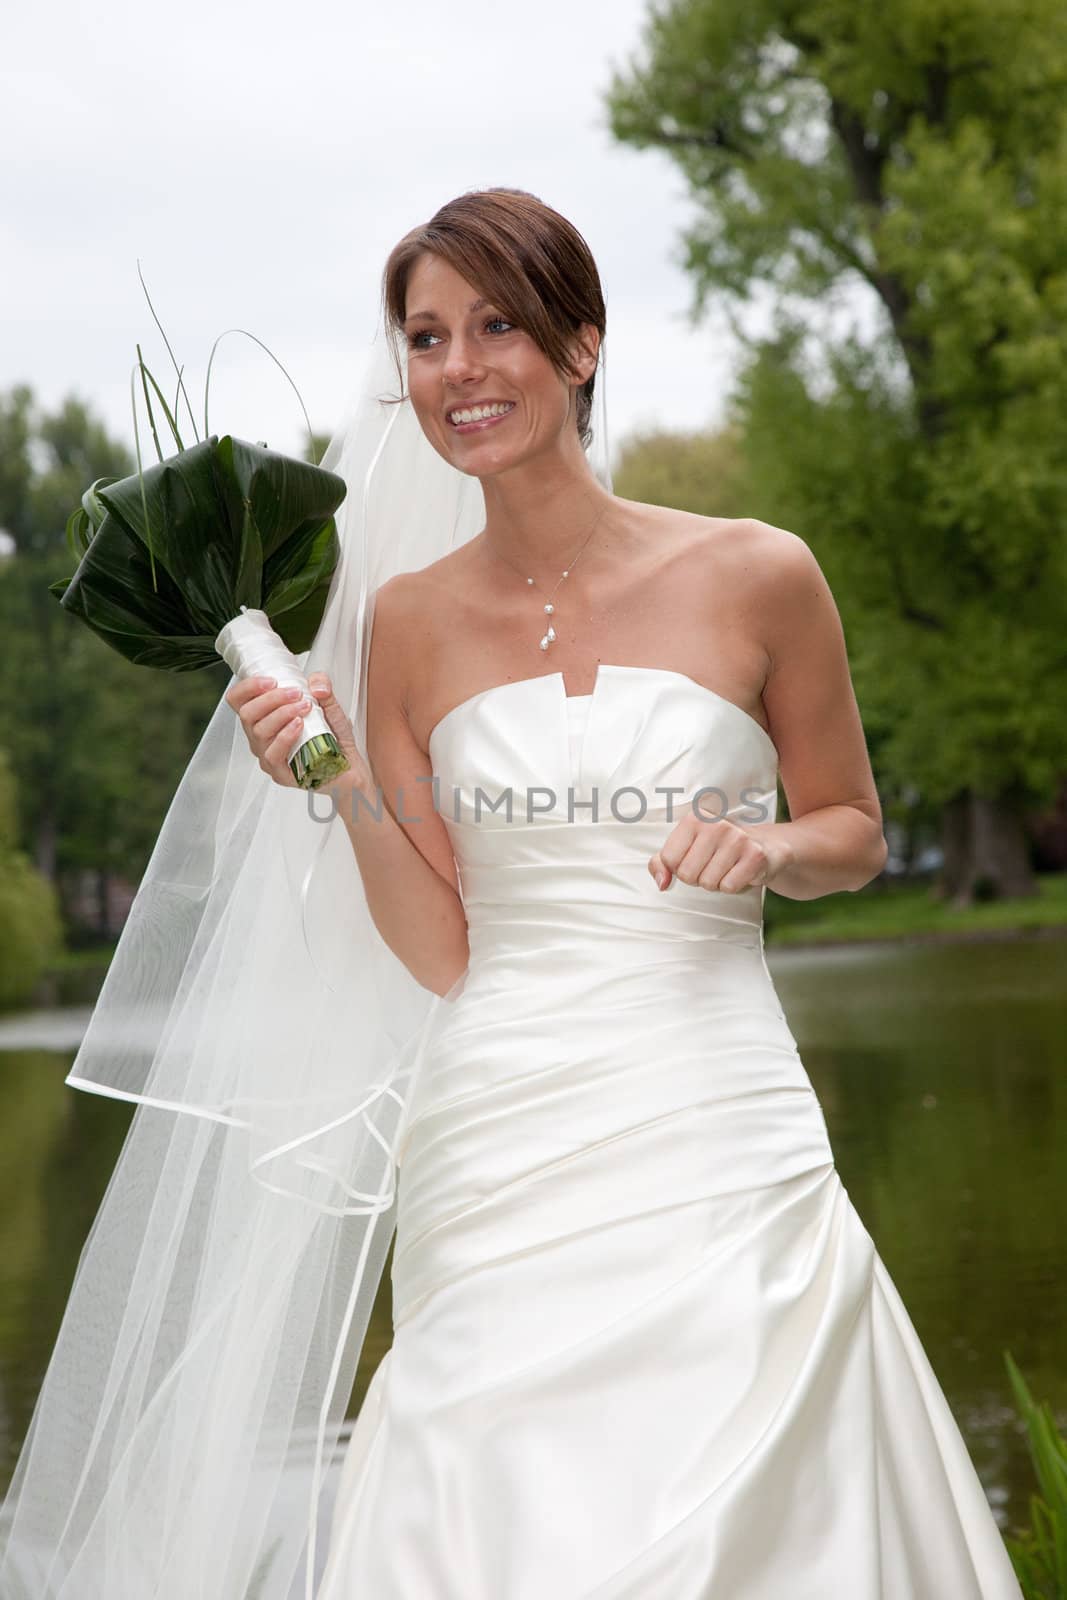 Beautiful bride with big smile looking happy and excited